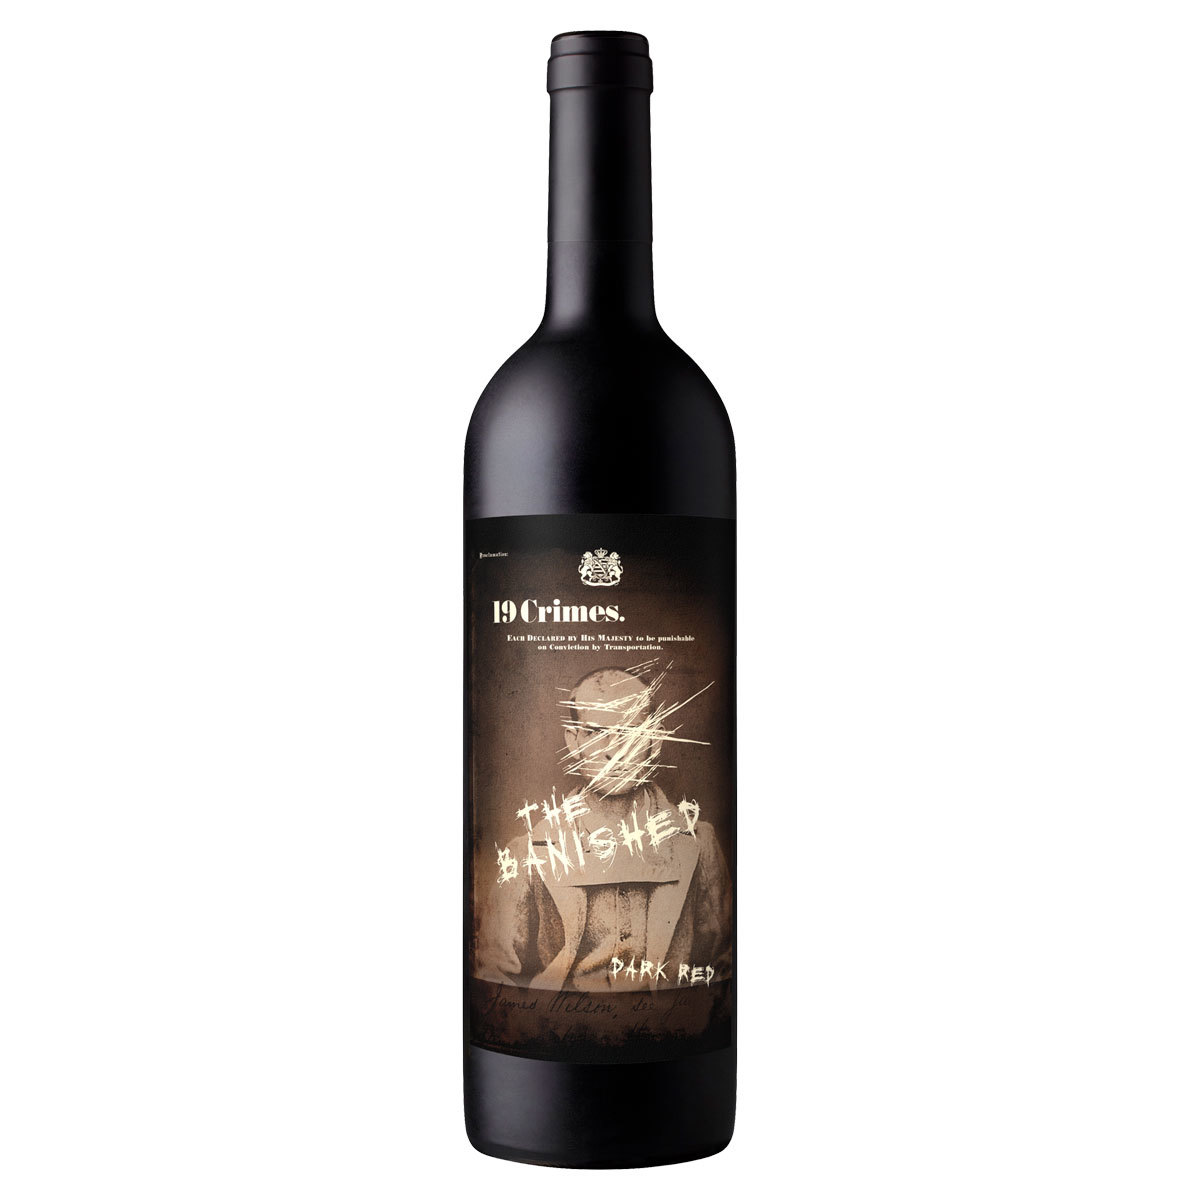 19 Crimes - The Banished Dark Red 2020, 75cl